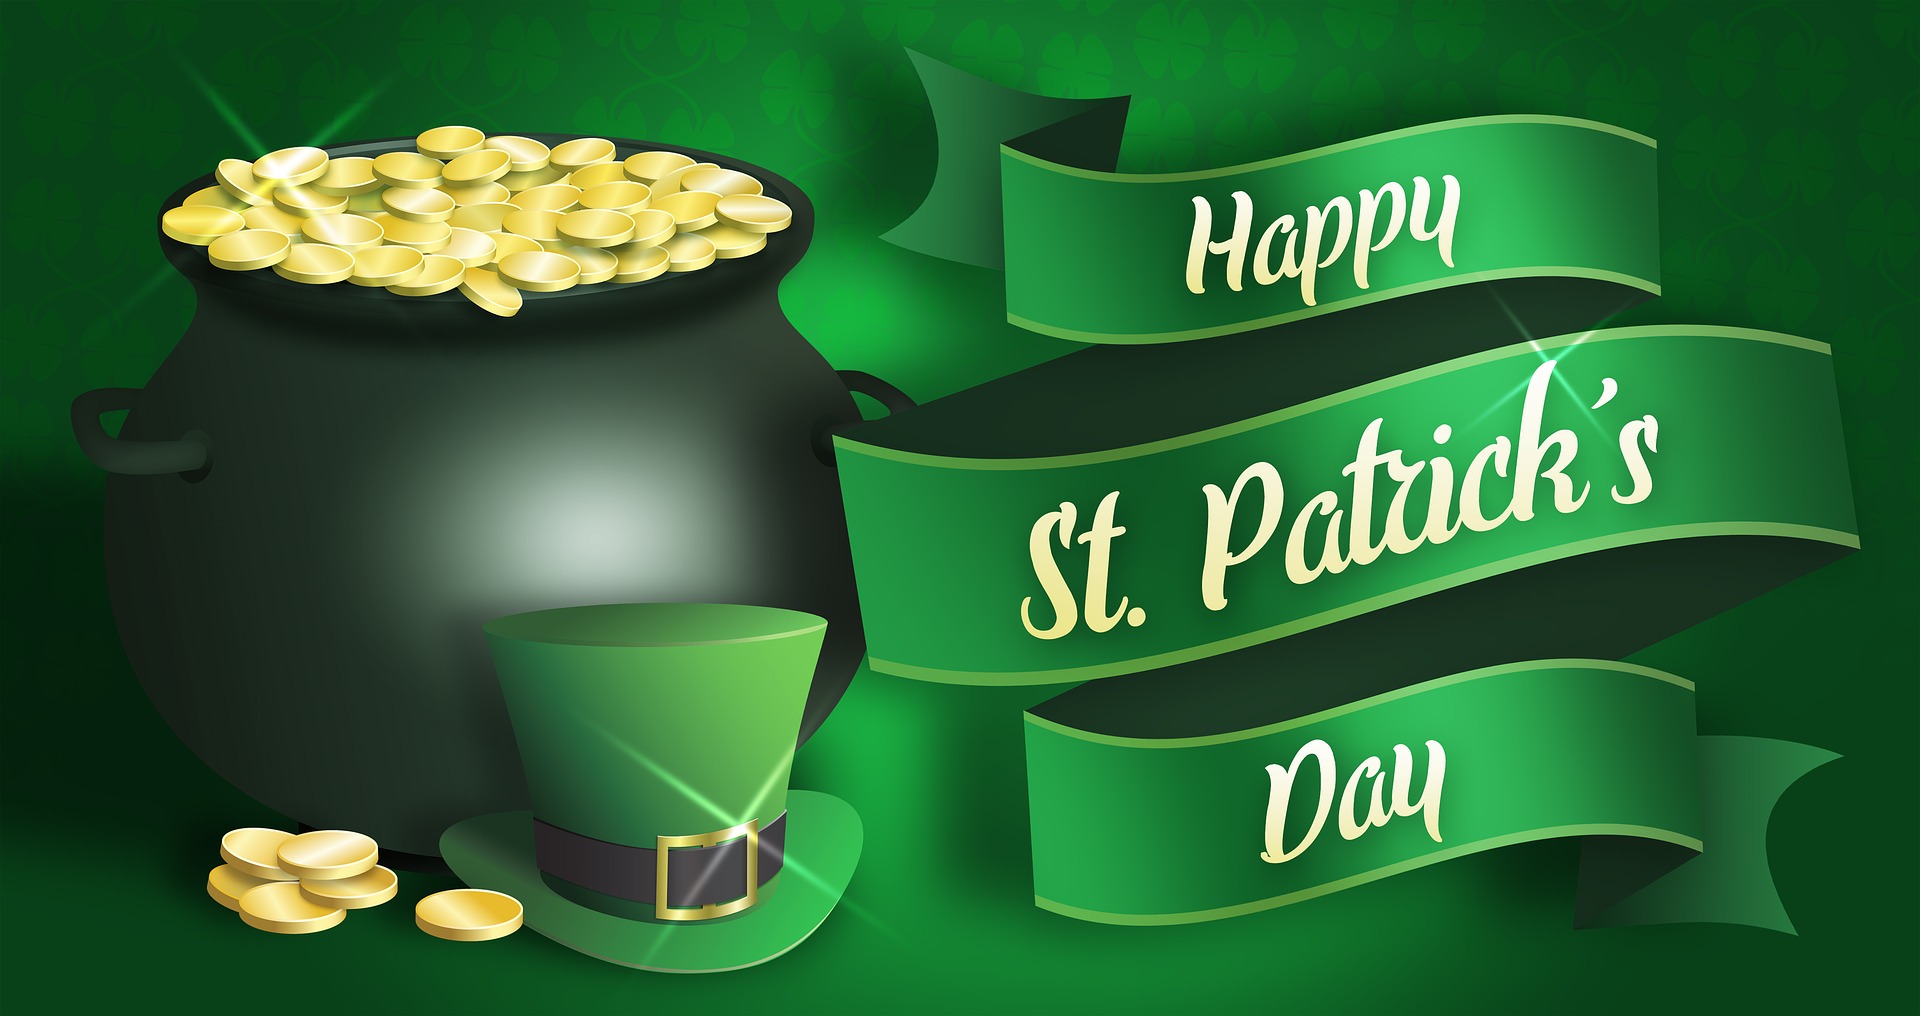 Celebrate St. Patrick's Day the Inexpensive Way